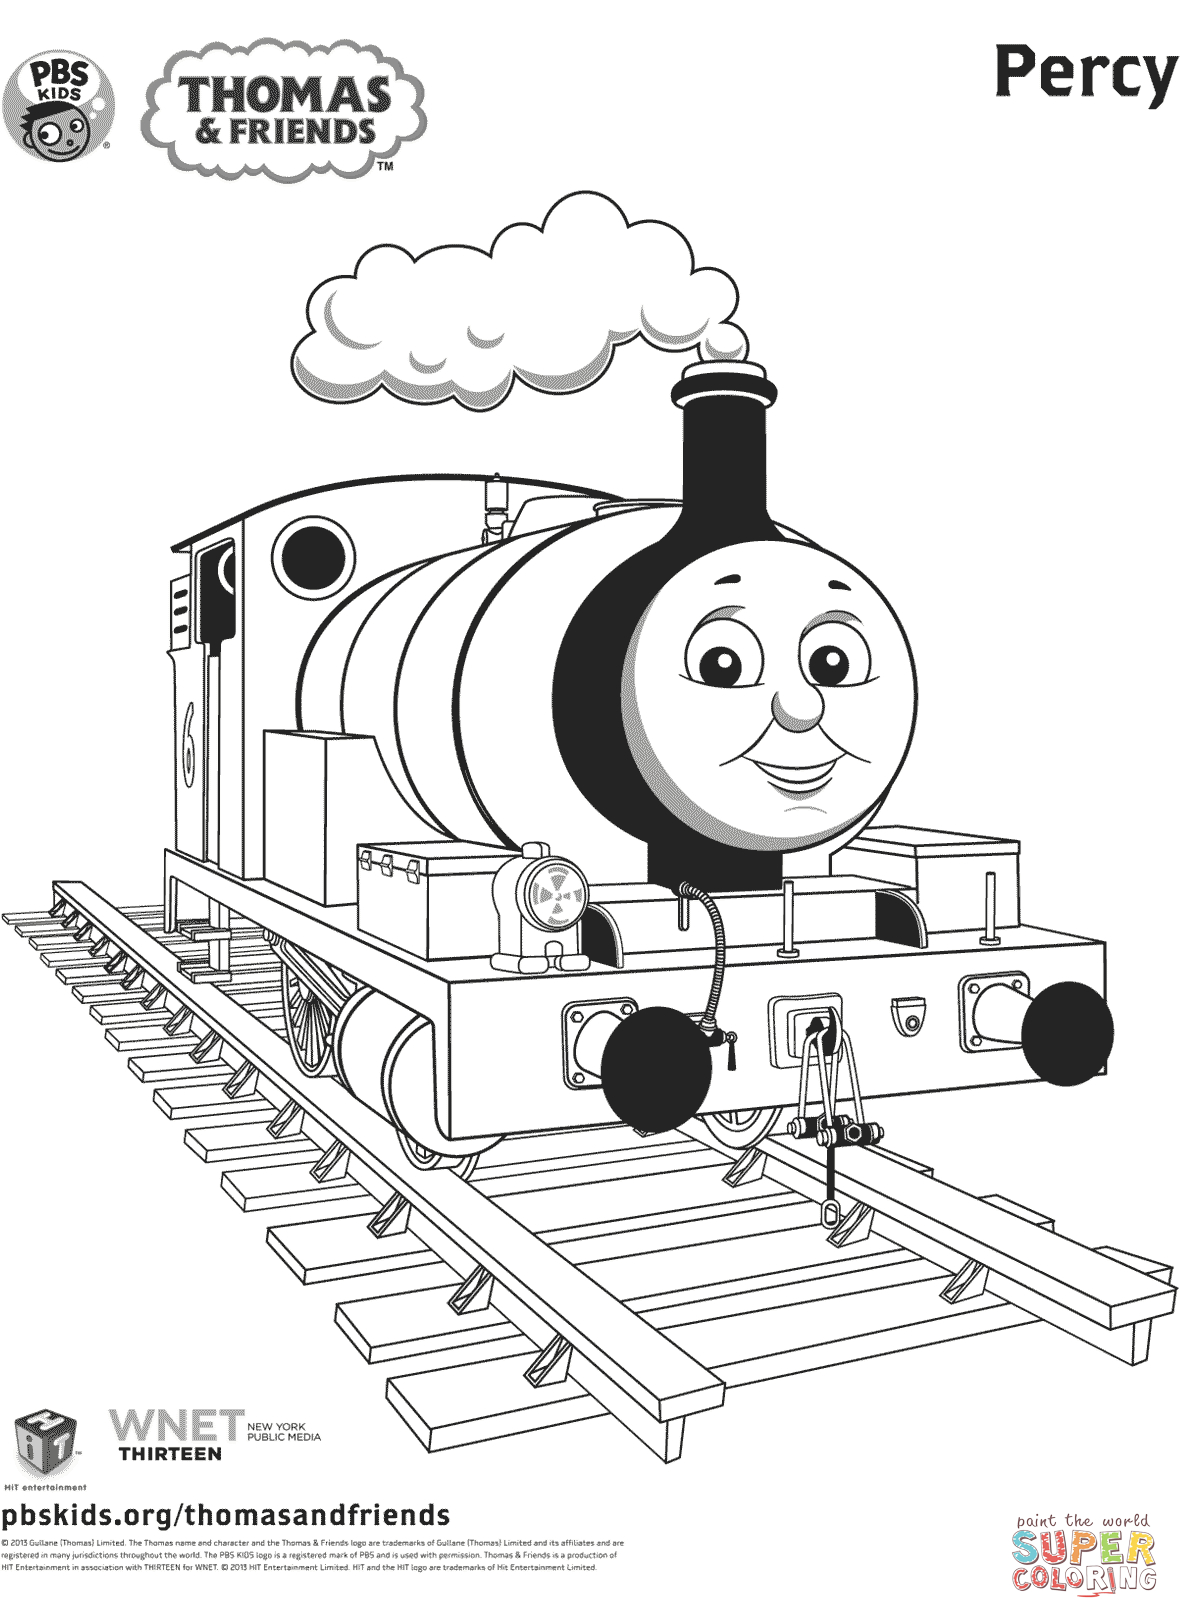 Thomas And Friends Coloring Pages Percy From Thomas Friends Coloring Page Free Printable Coloring